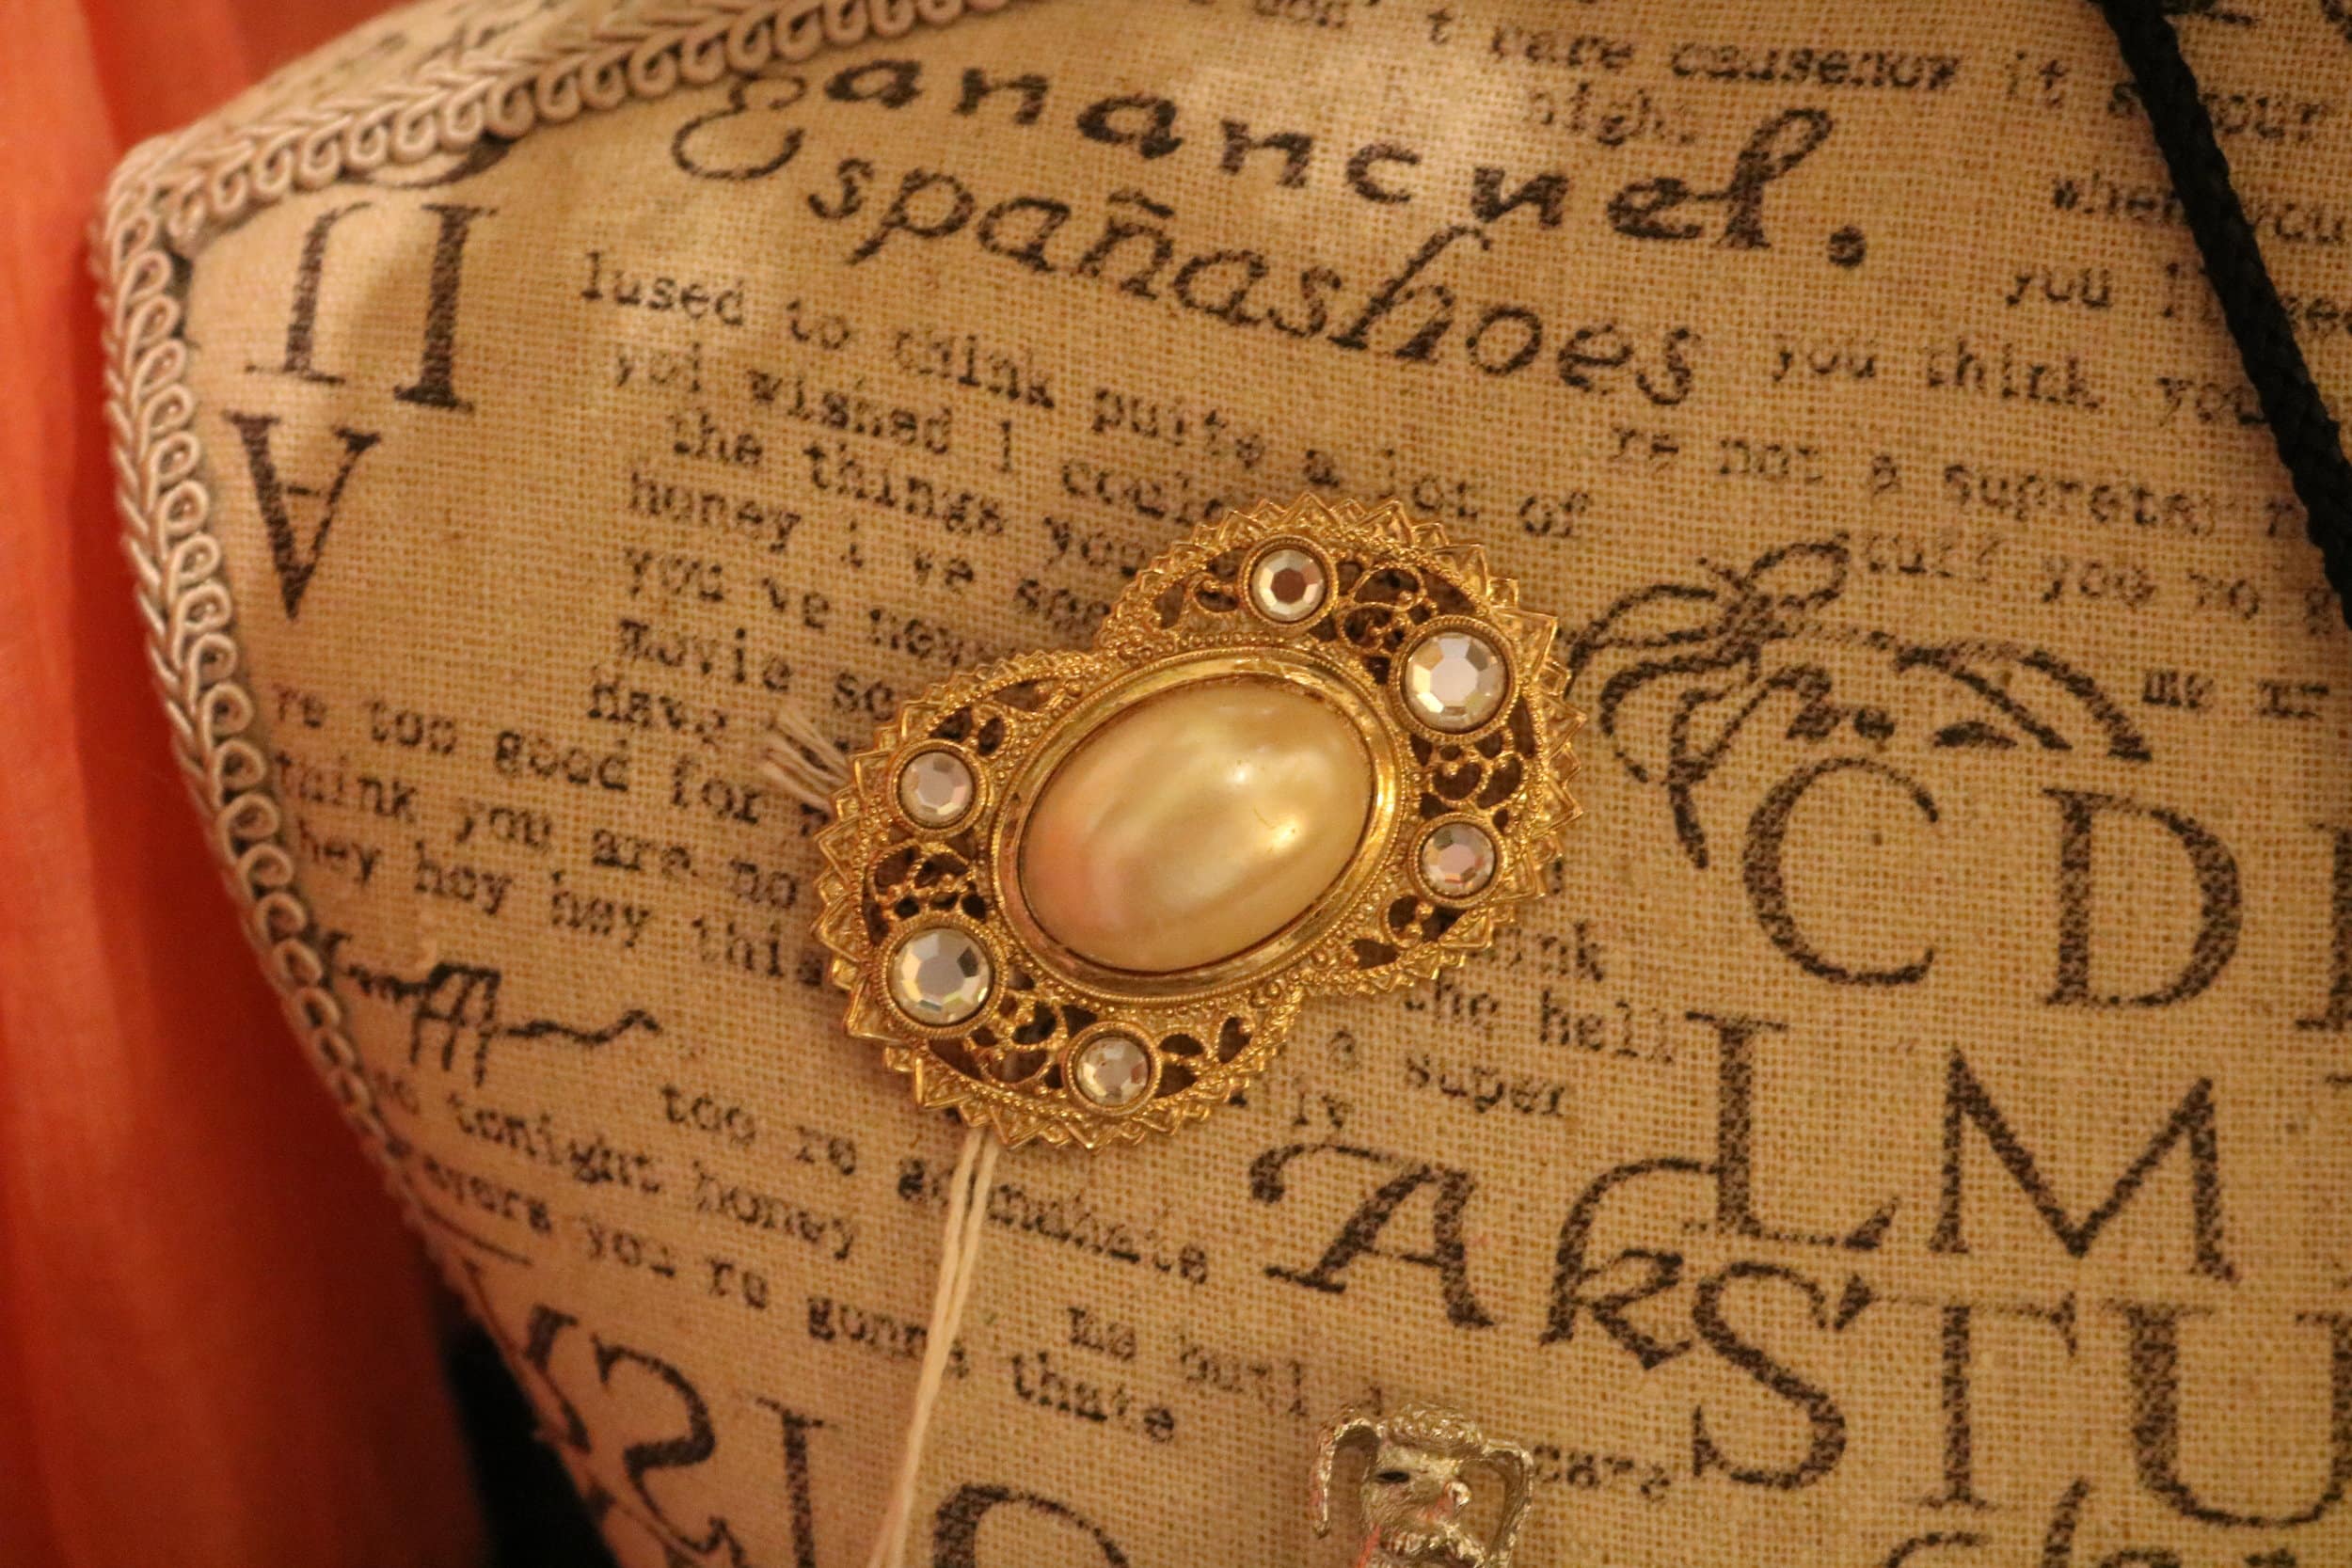 A gold and pearl broach pinned on a mannequin.